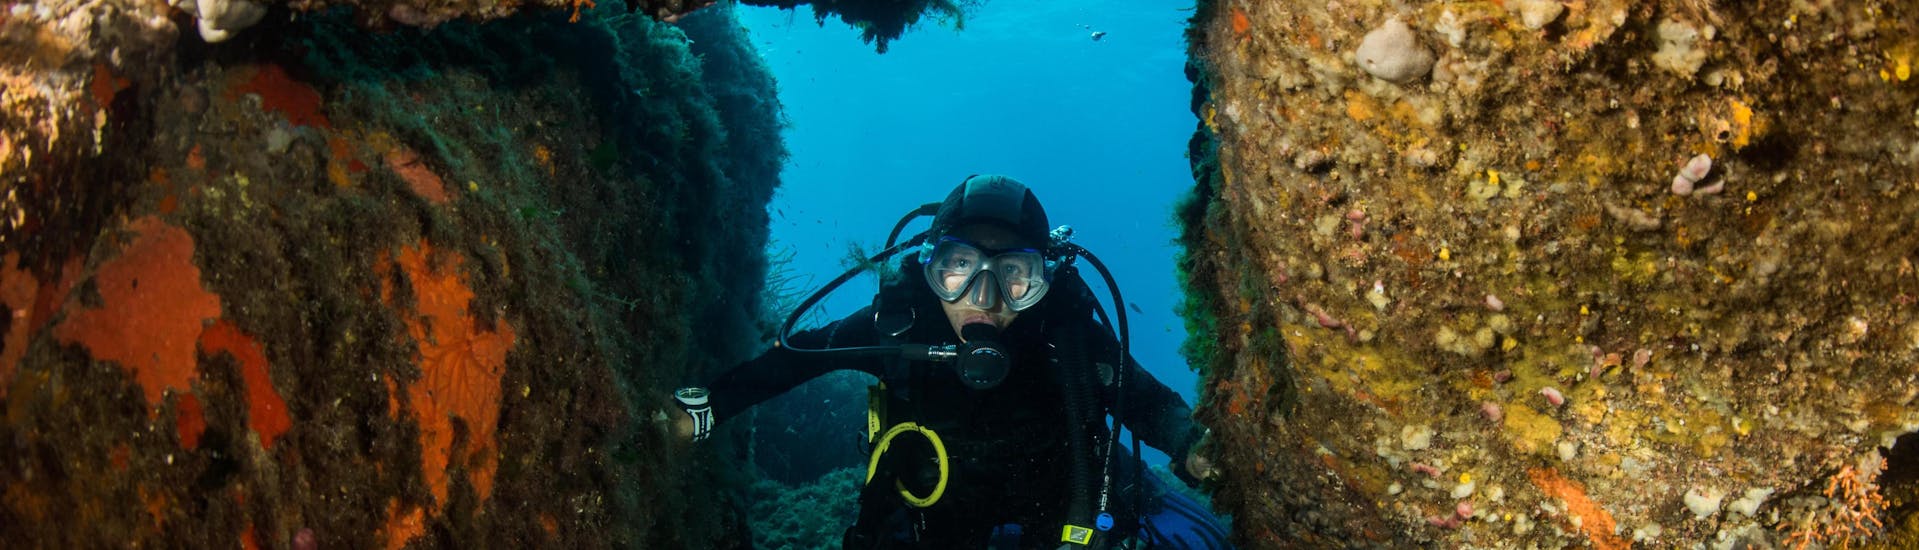 A diver is enjoying the seabed in Corse du Sud, Corsica during a diving excursion.